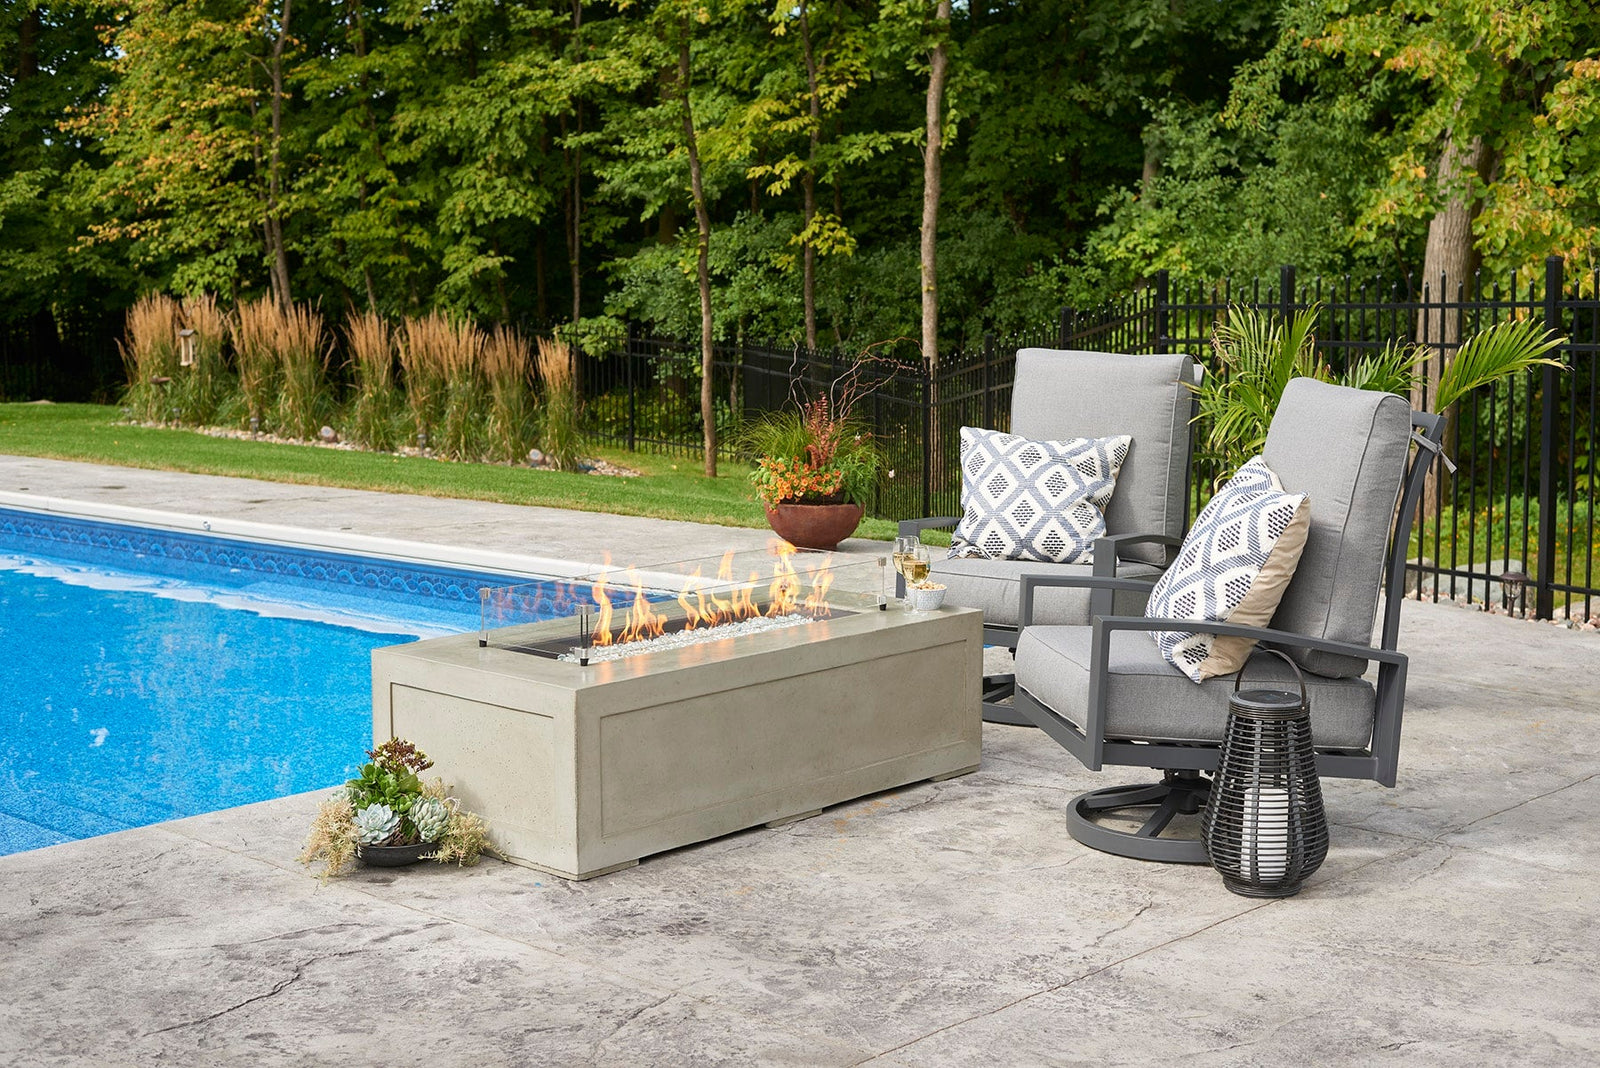 5 Fire Pits to Compliment Your Pool or Spa